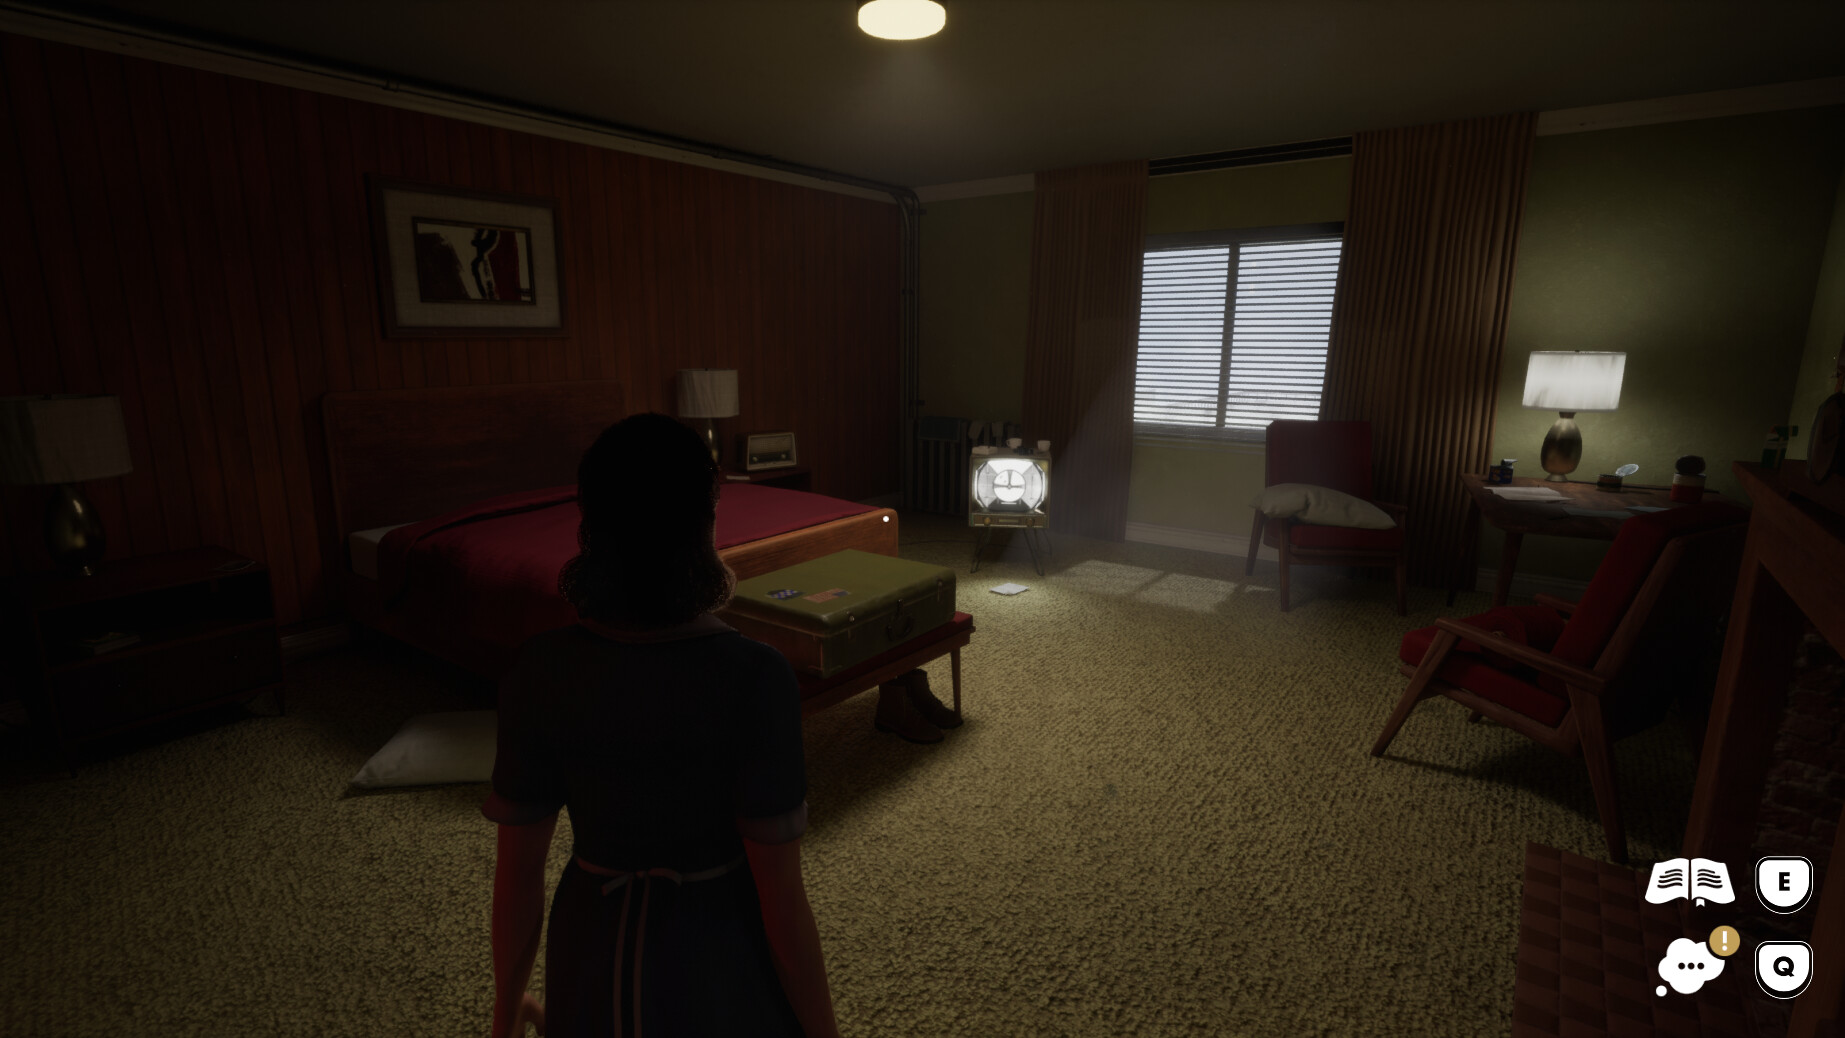 A screenshot from This Bed We Made. We see the back of a hotel maid standing in a hotel room. The bed is made, the television is on, but there is nobody else there. A suitcase lies on a bench and something book-like appears to be on the floor in front of the 1950's television set.